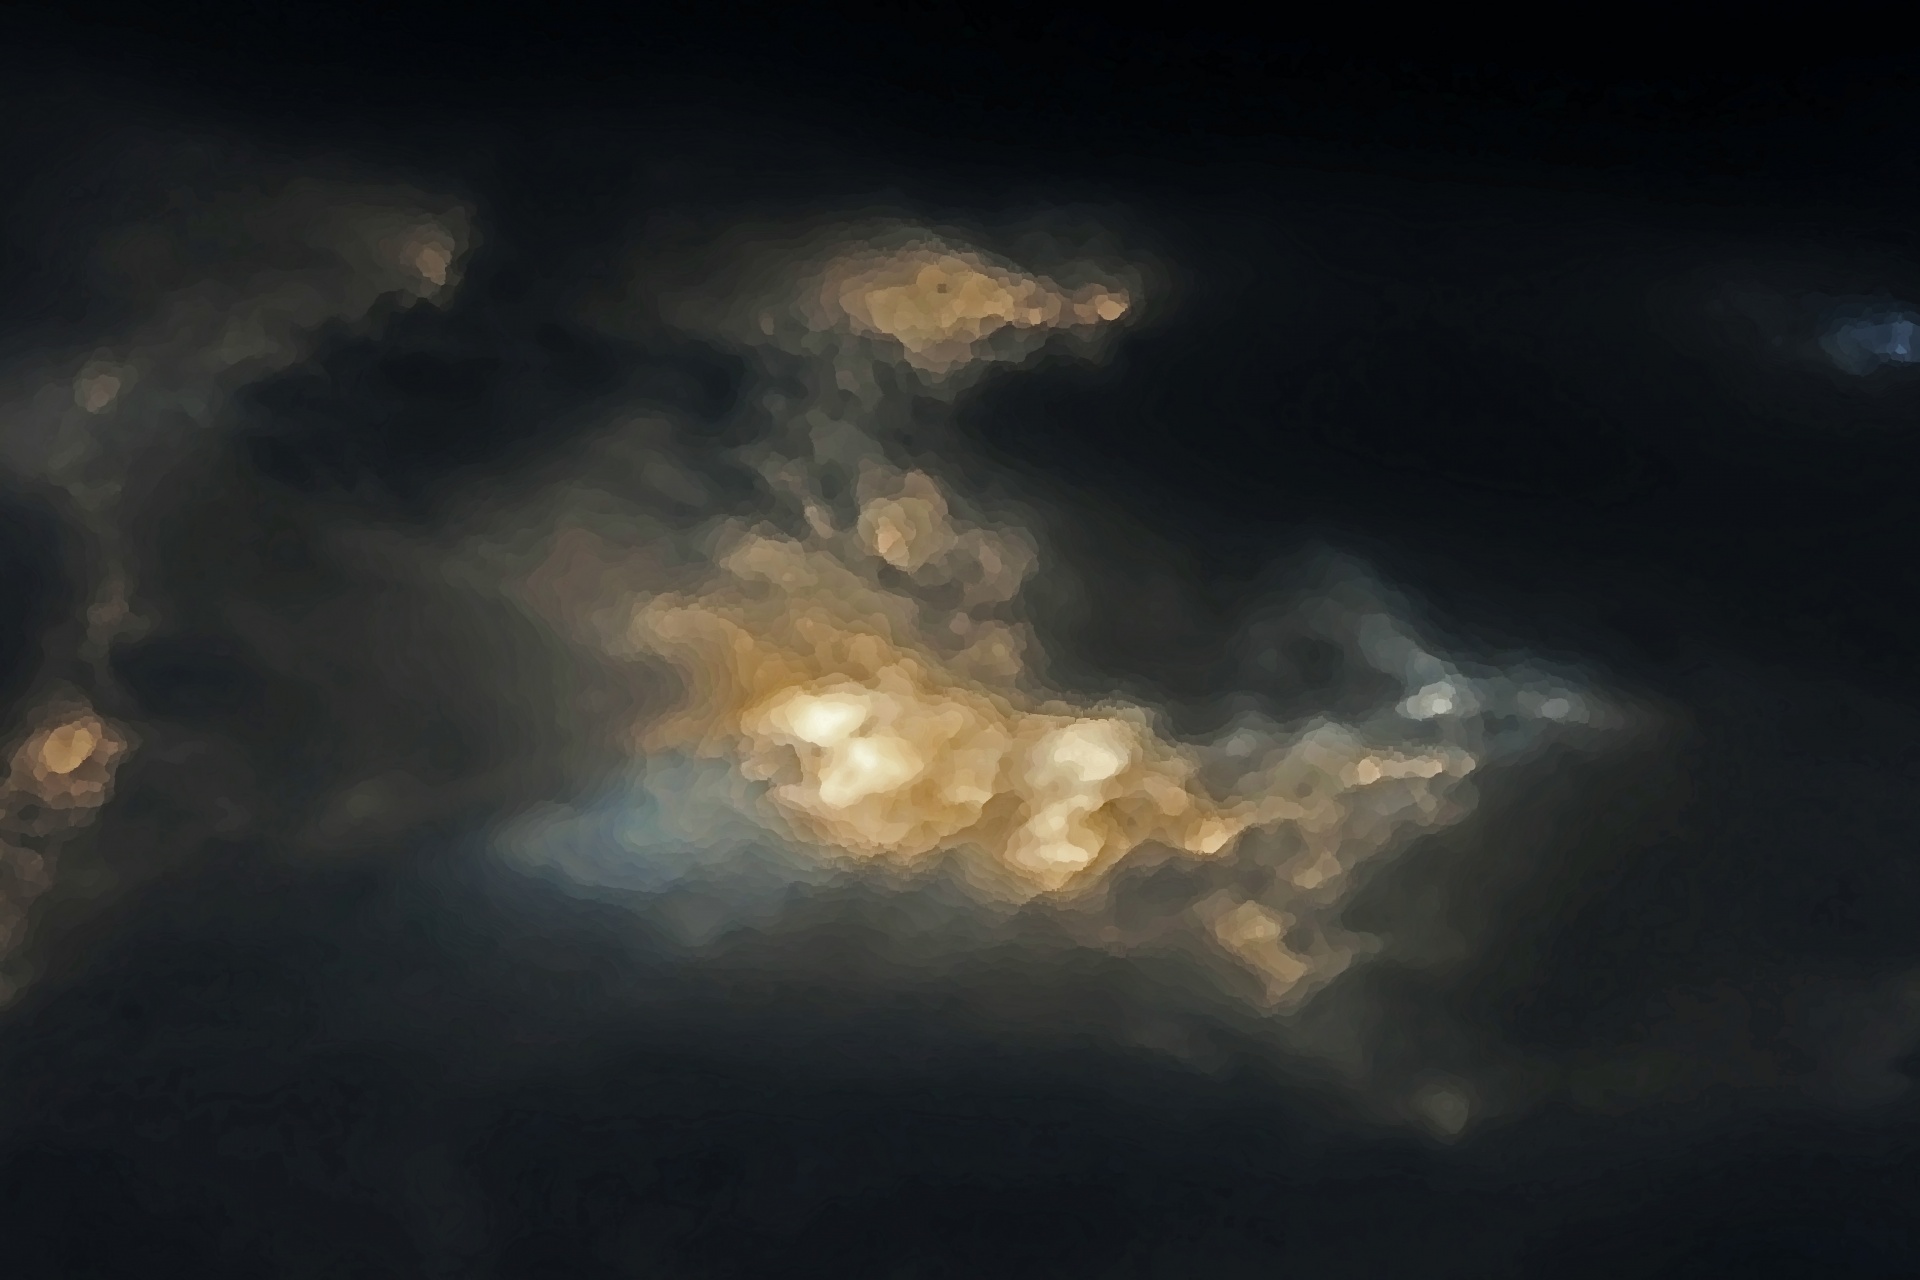 Artistic Effect Of Light In Cloud